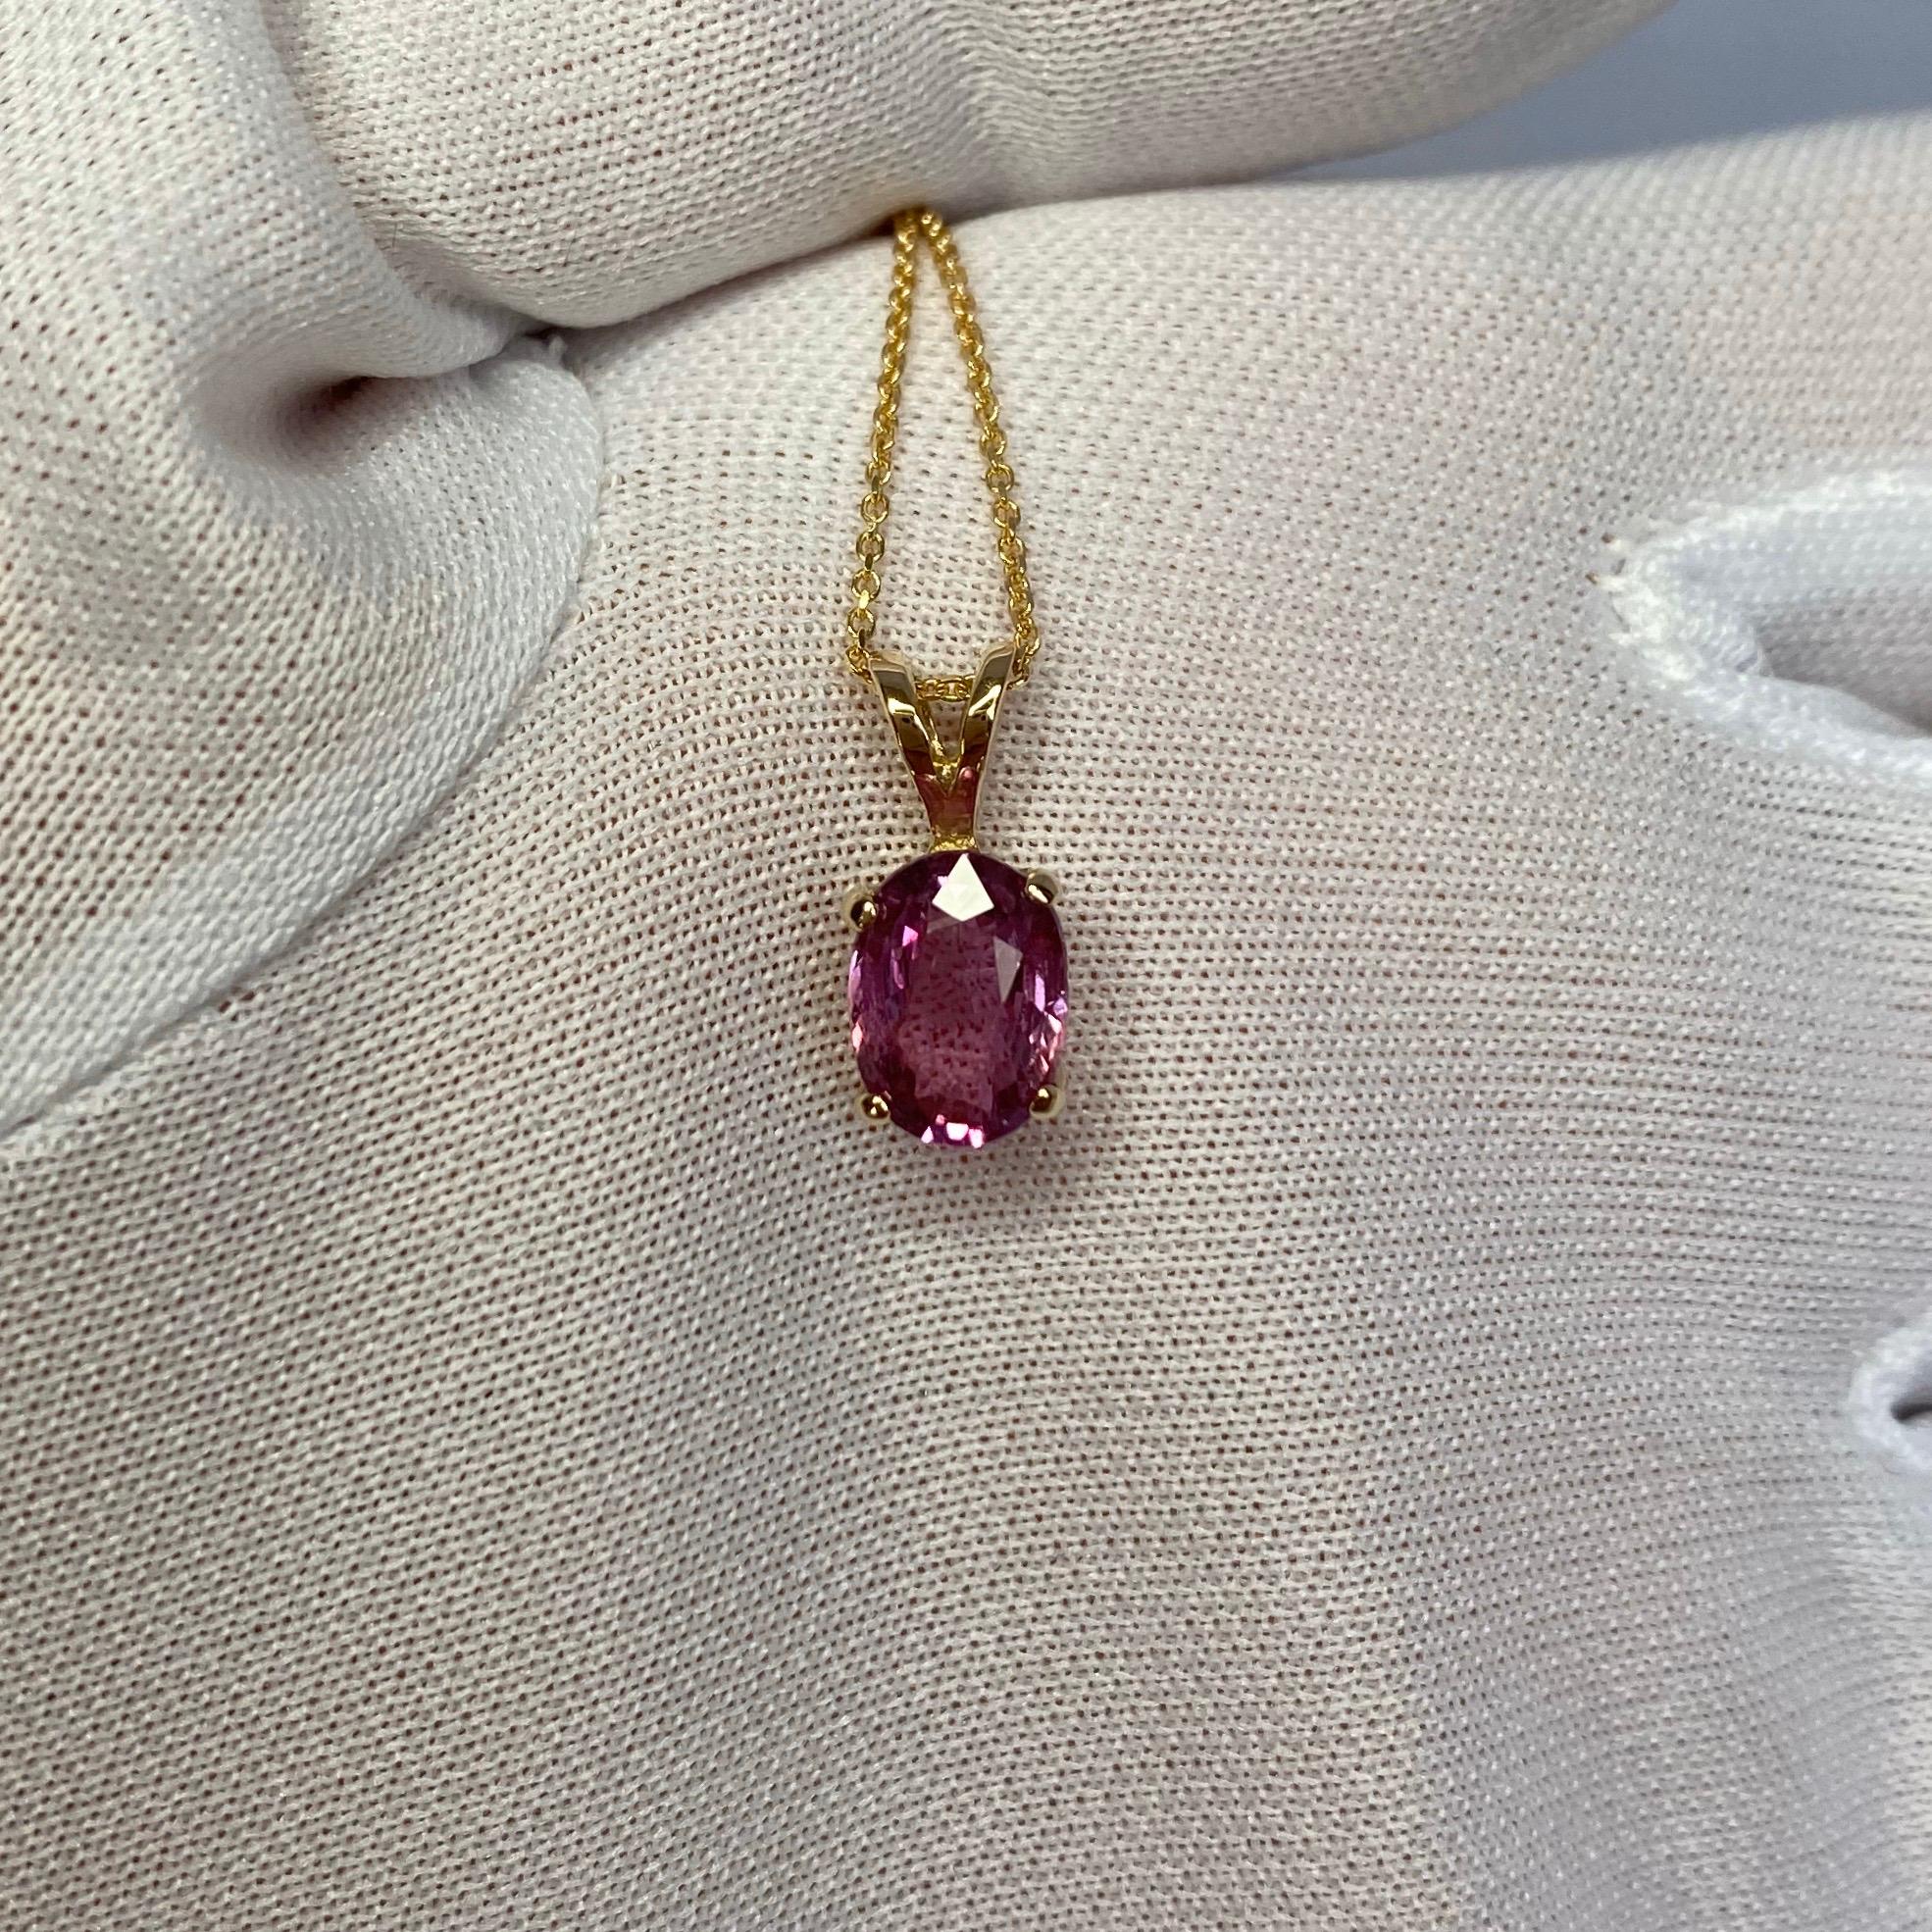 IGI Certified Untreated 1.61ct Pink Purple Sapphire Solitaire Pendant Necklace 2